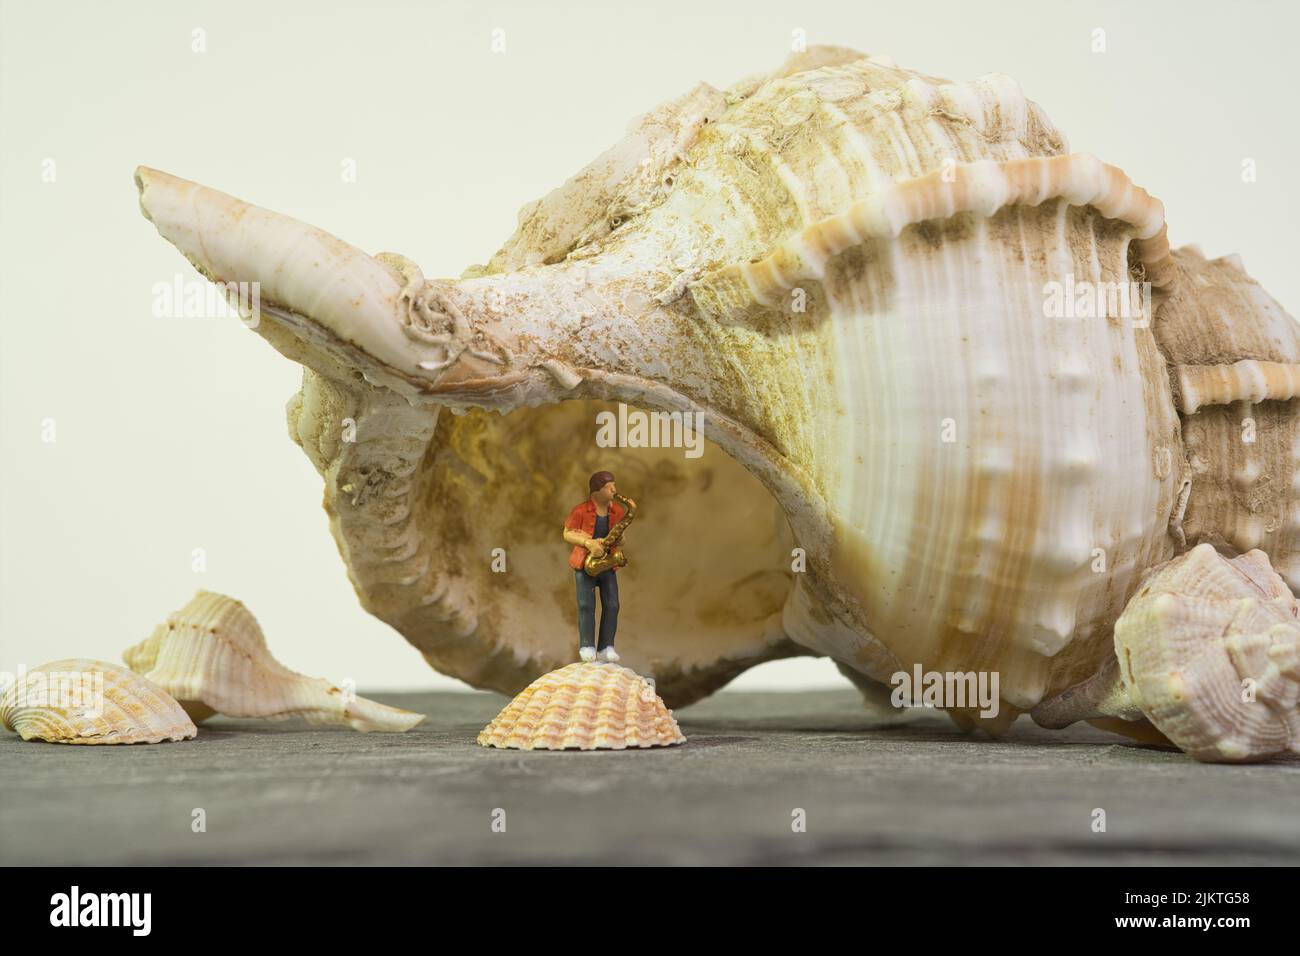 Saxophonist plays under a giant sea snail shell Stock Photo